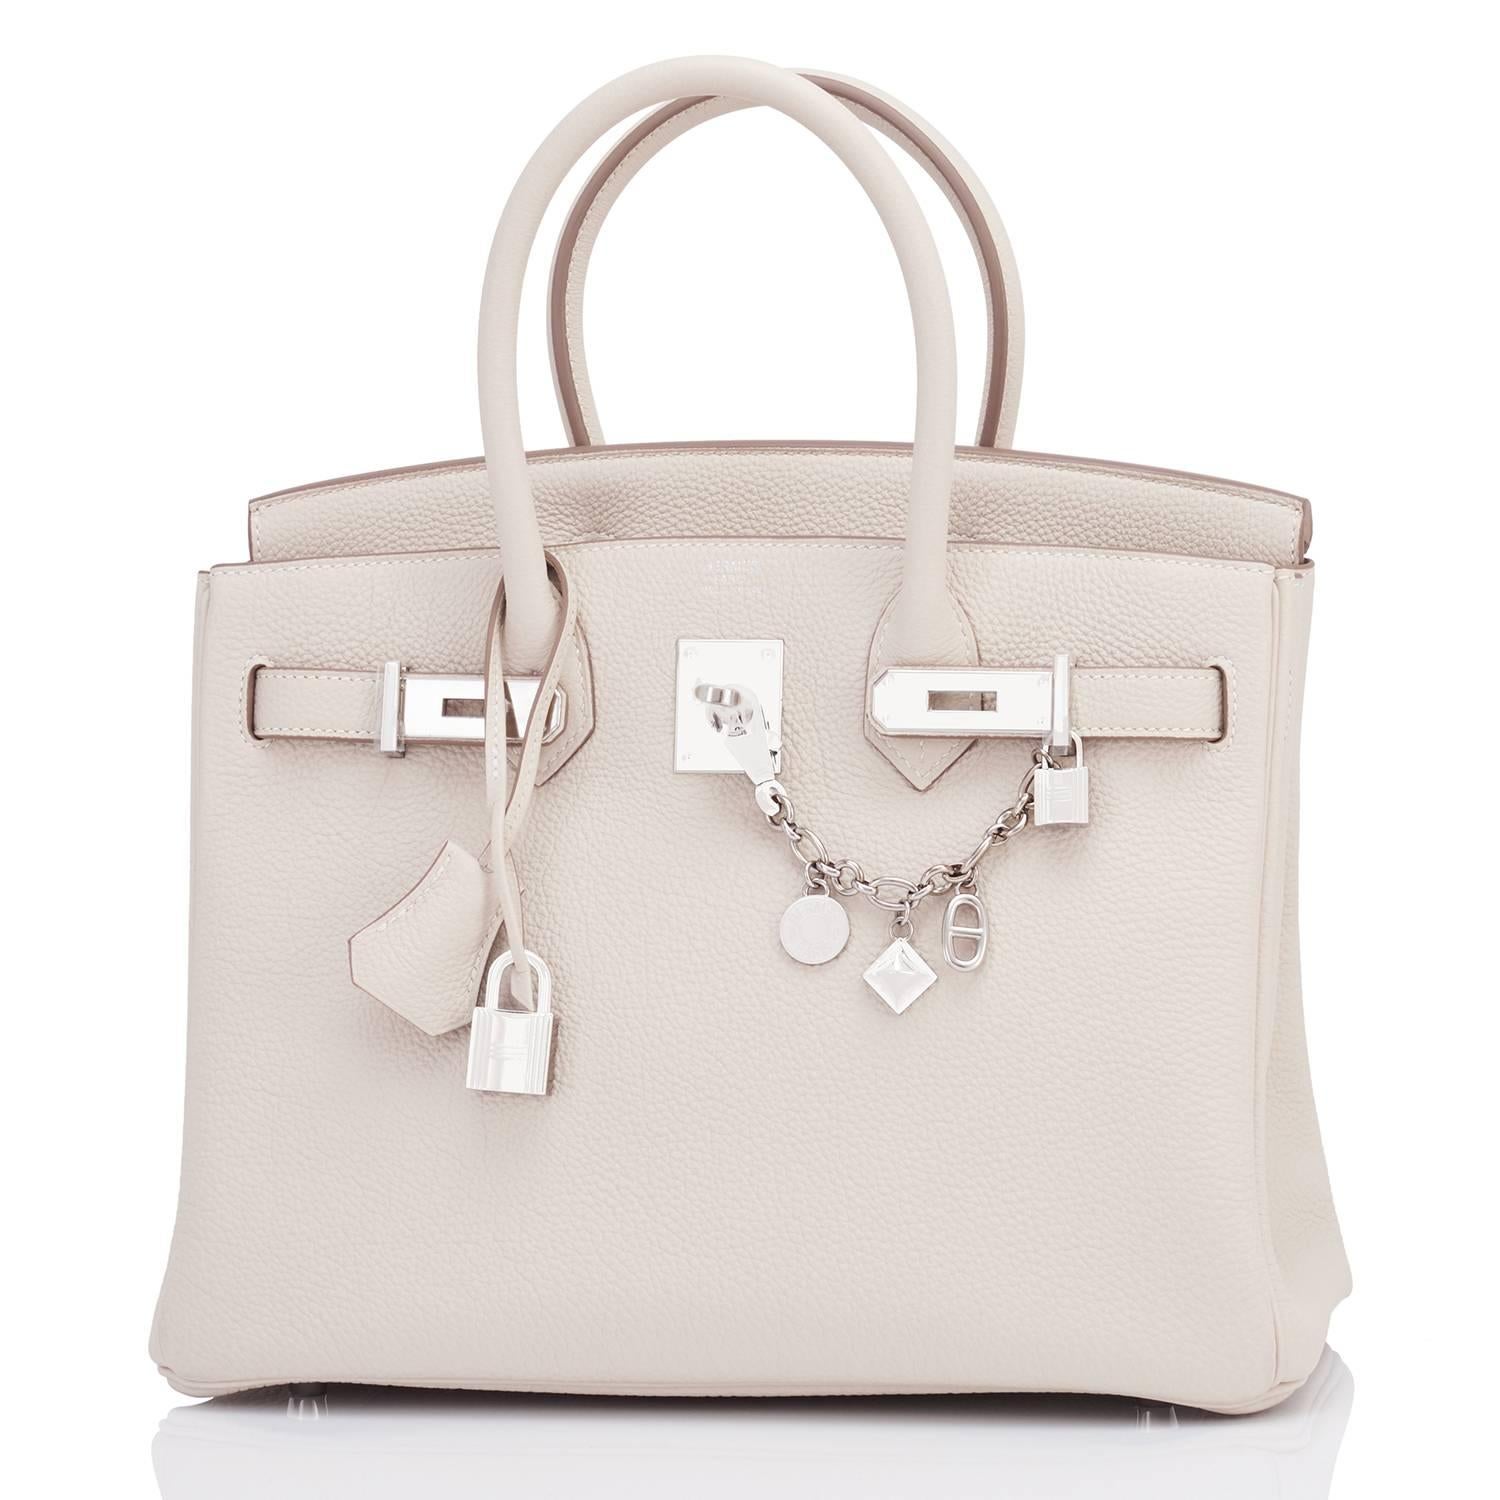 Hermes Craie 30cm Togo Birkin Palladium Hardware Bliss
Brand New in Box. Store fresh. Pristine Condition (with plastic on hardware)
Perfect gift! Comes in full set with lock, keys, clochette, sleeper, raincoat, and orange Hermes box.
Pure neutral